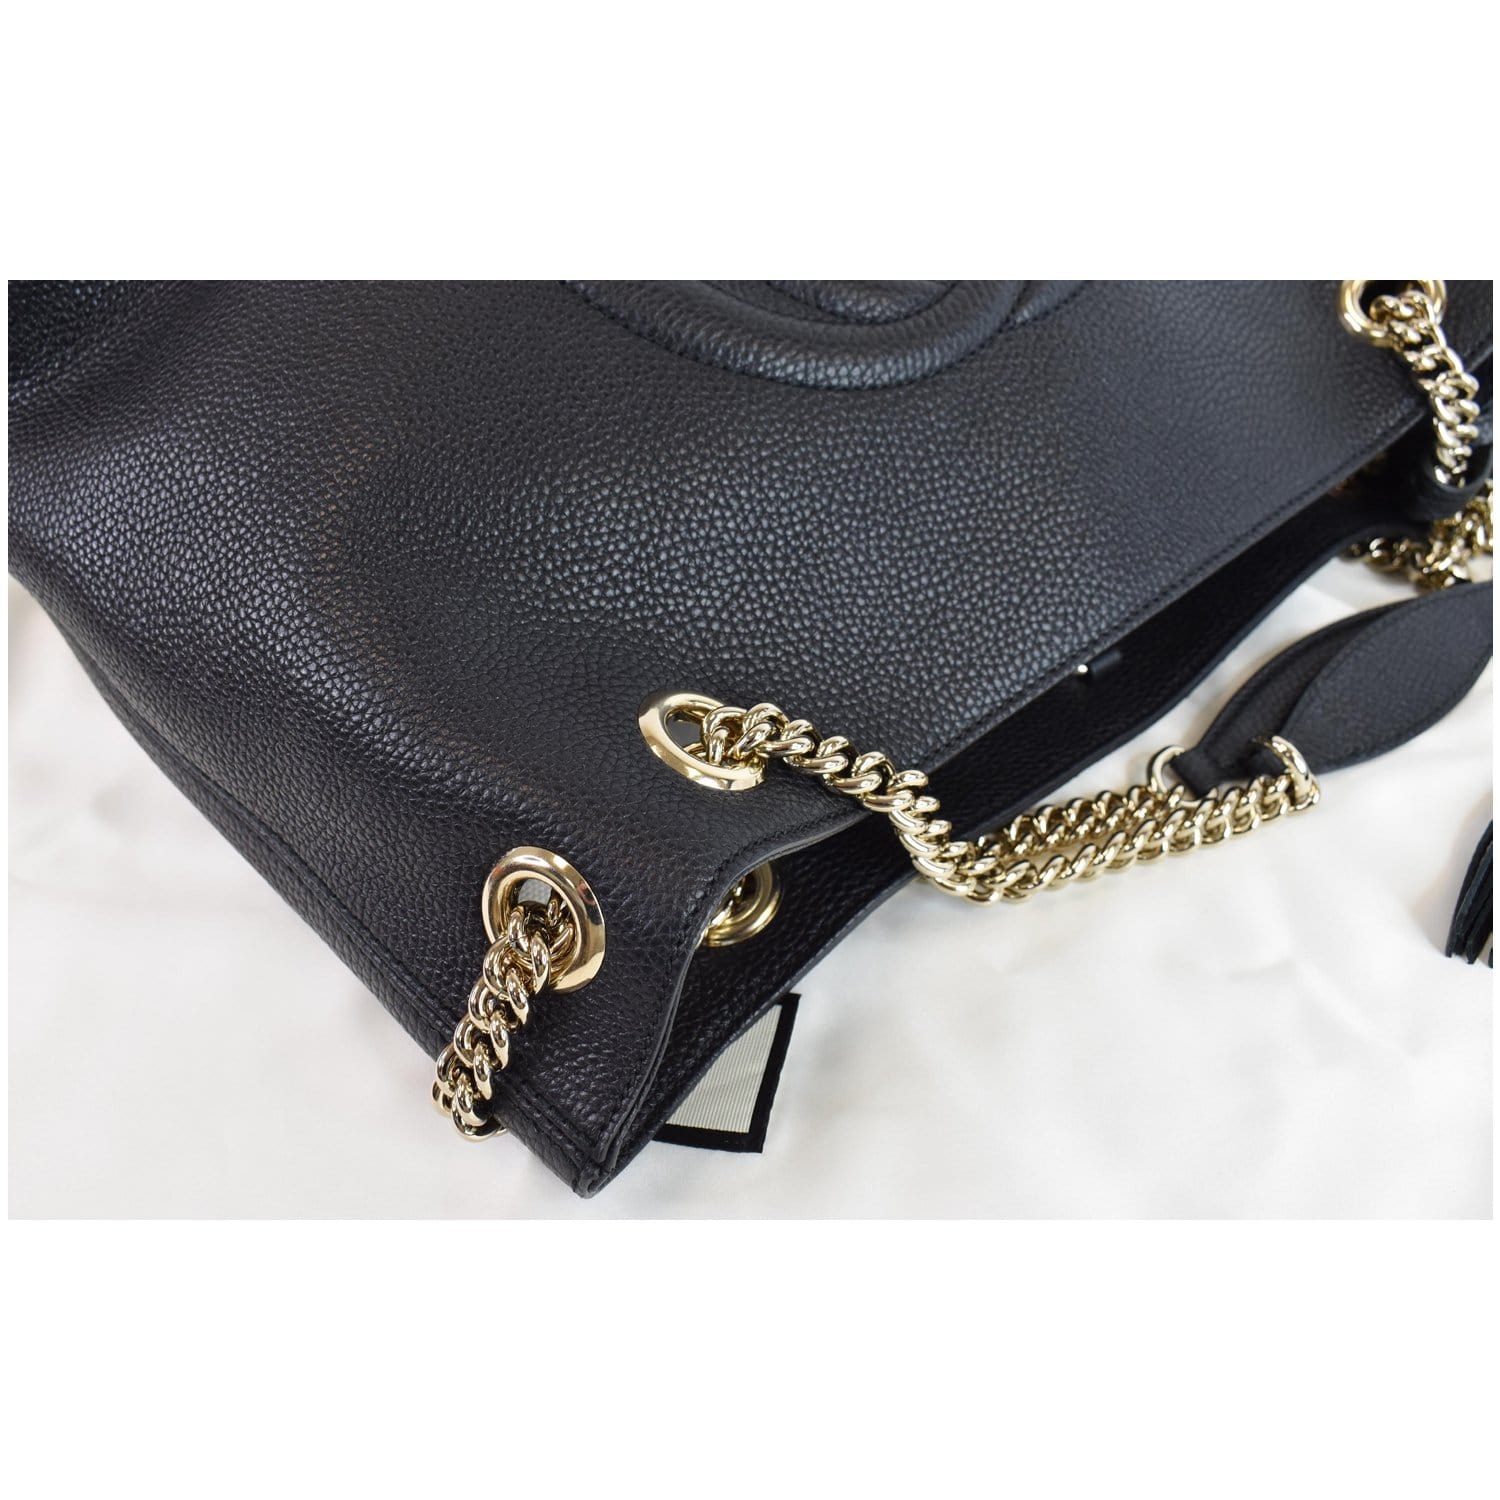 Gg marmont chain leather tote Gucci Black in Leather - 34227440